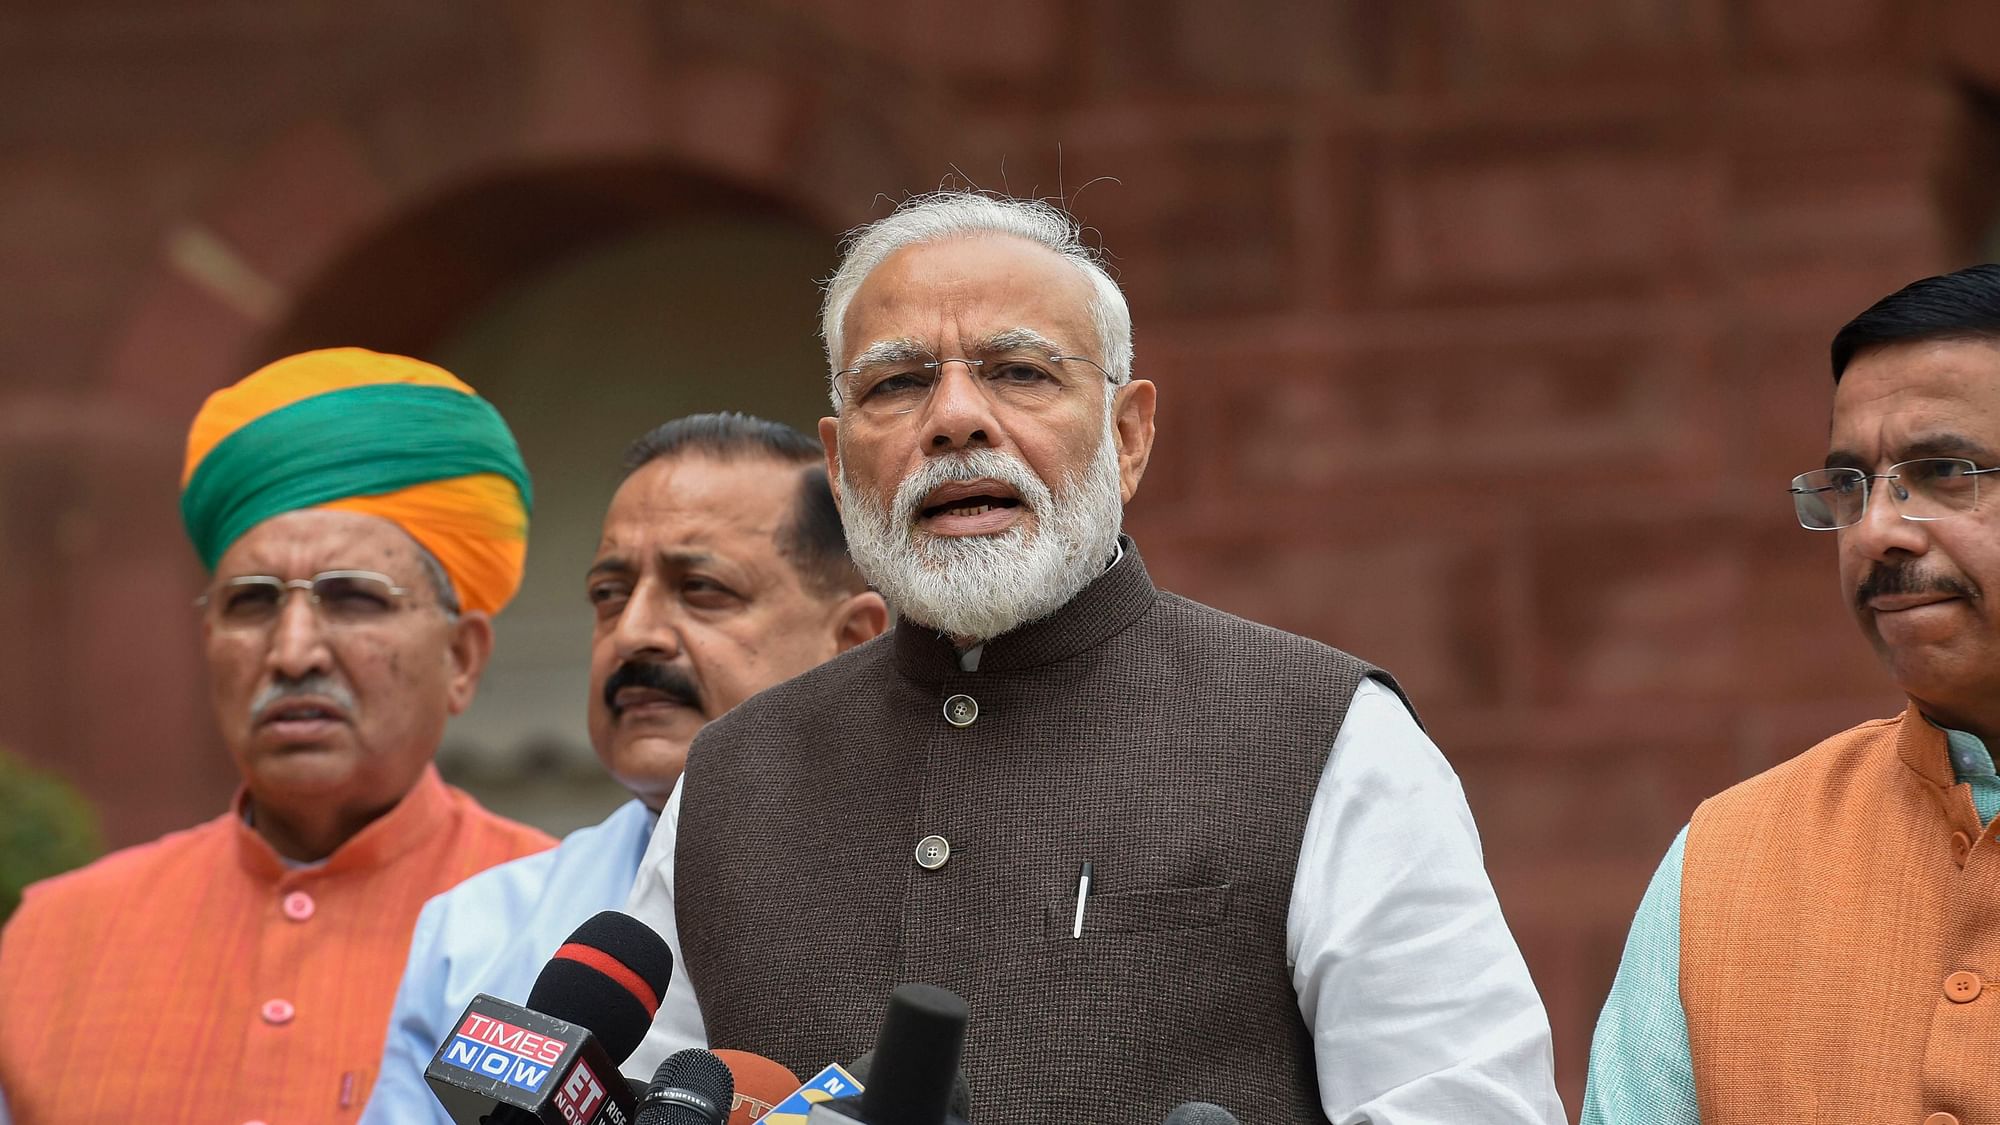 PM Modi addressed the media as he arrived for the first session of 17th Lok Sabha, at Parliament.